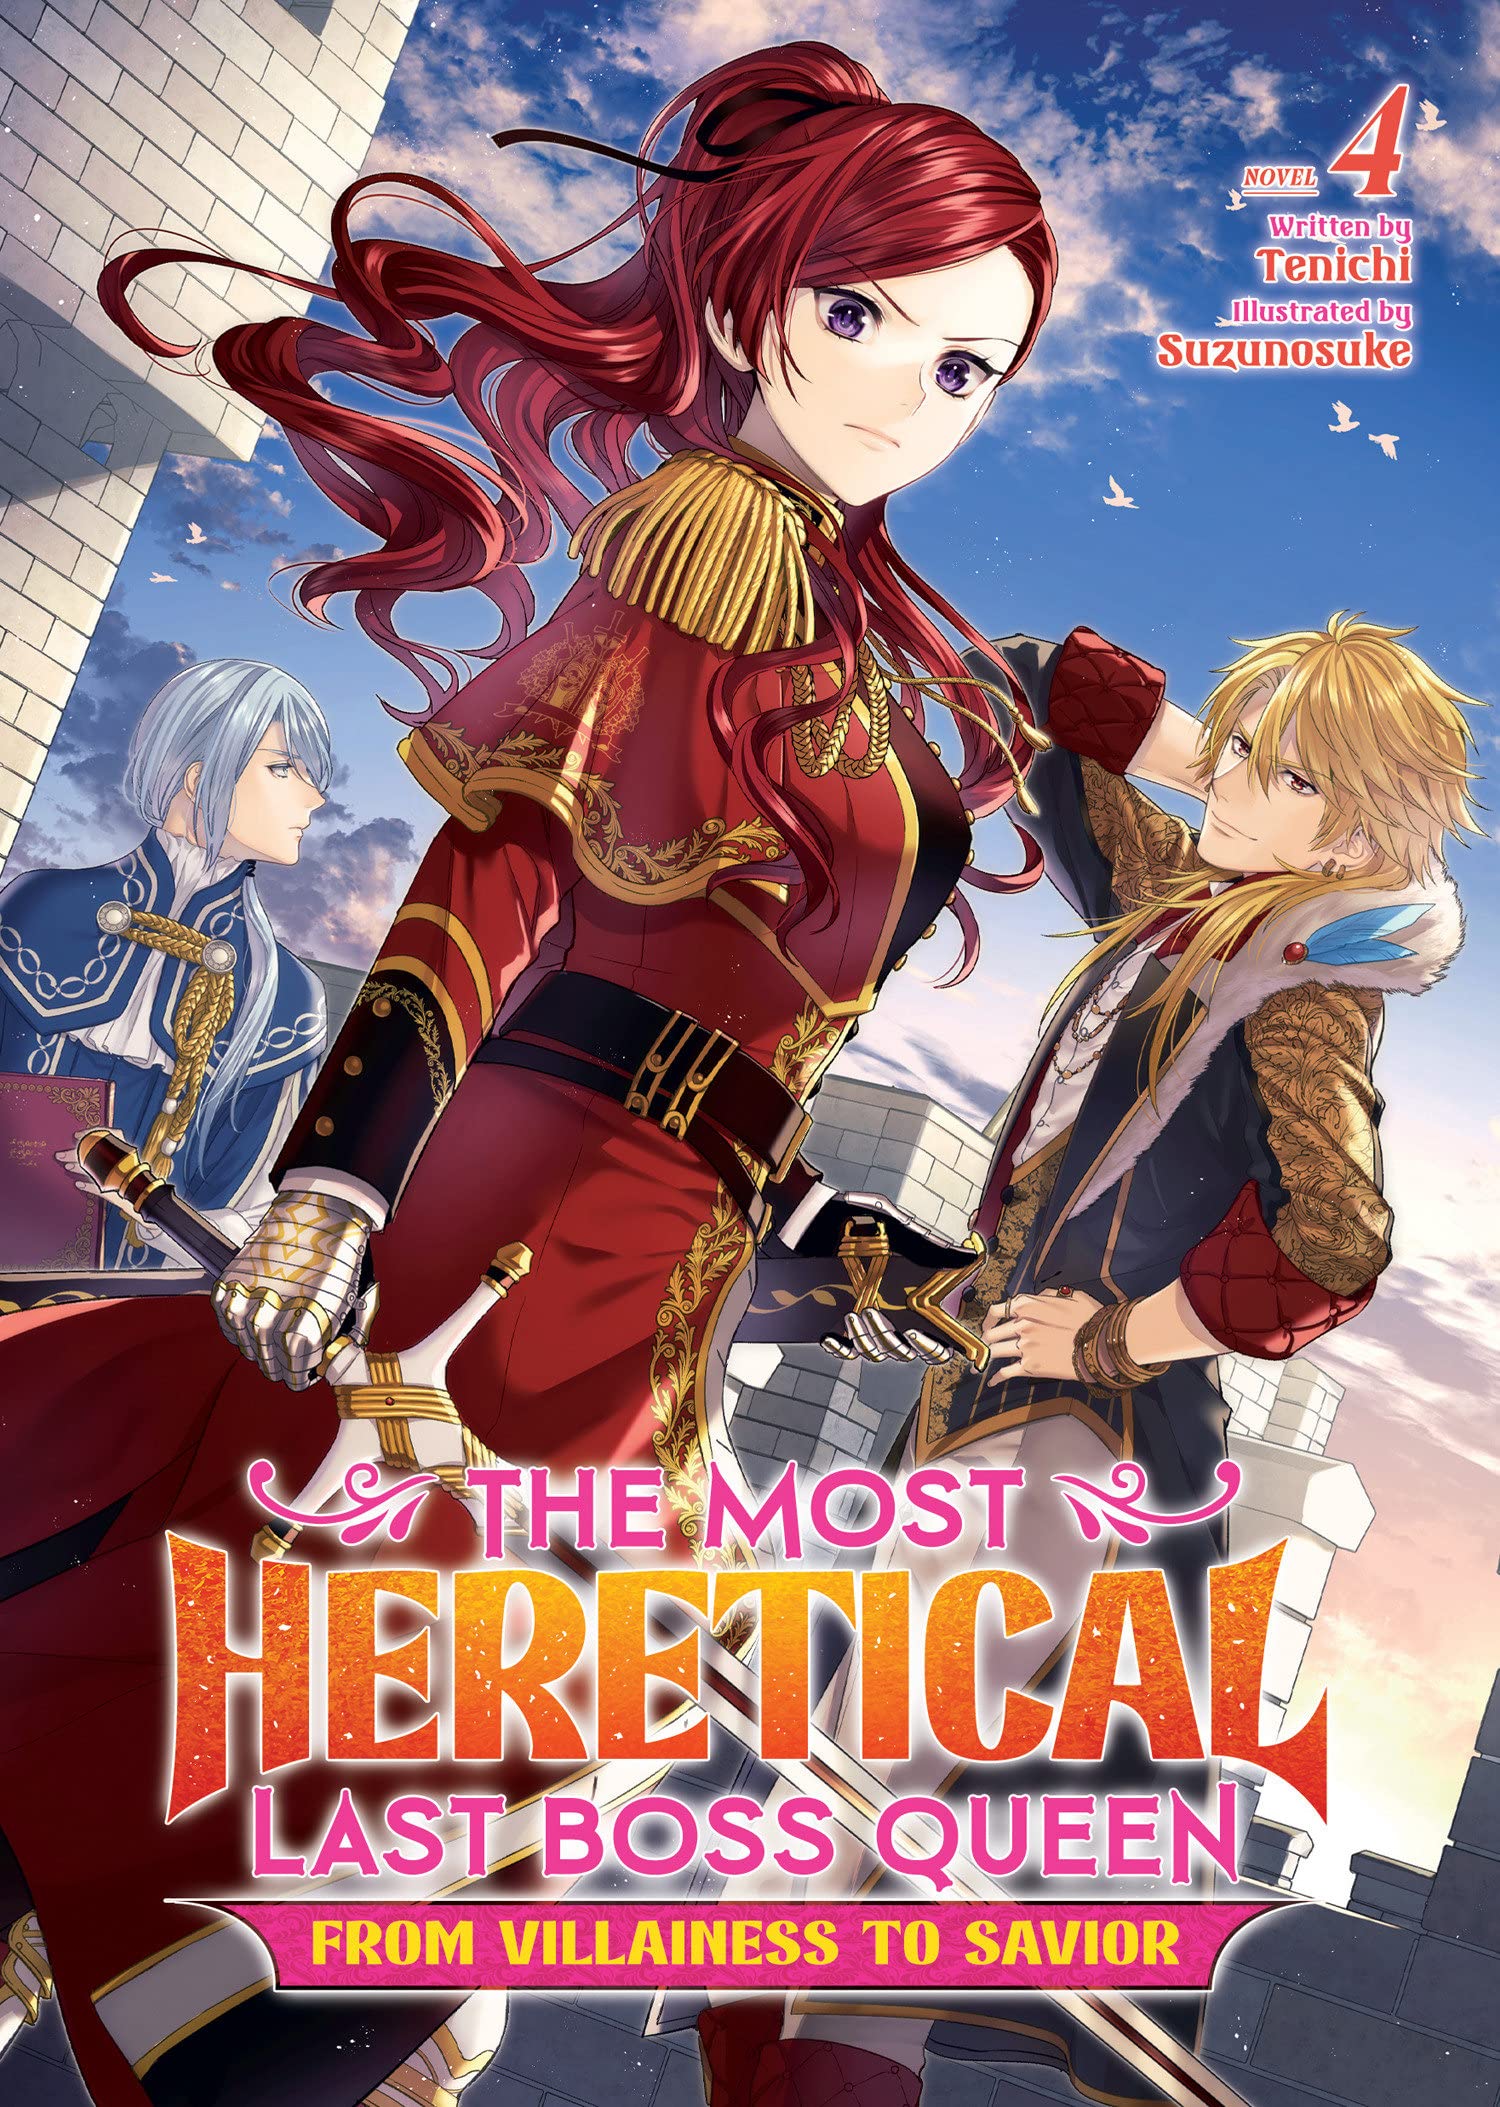 The Most Heretical Last Boss Queen: From Villainess to Savior (Light Novel) Vol. 04